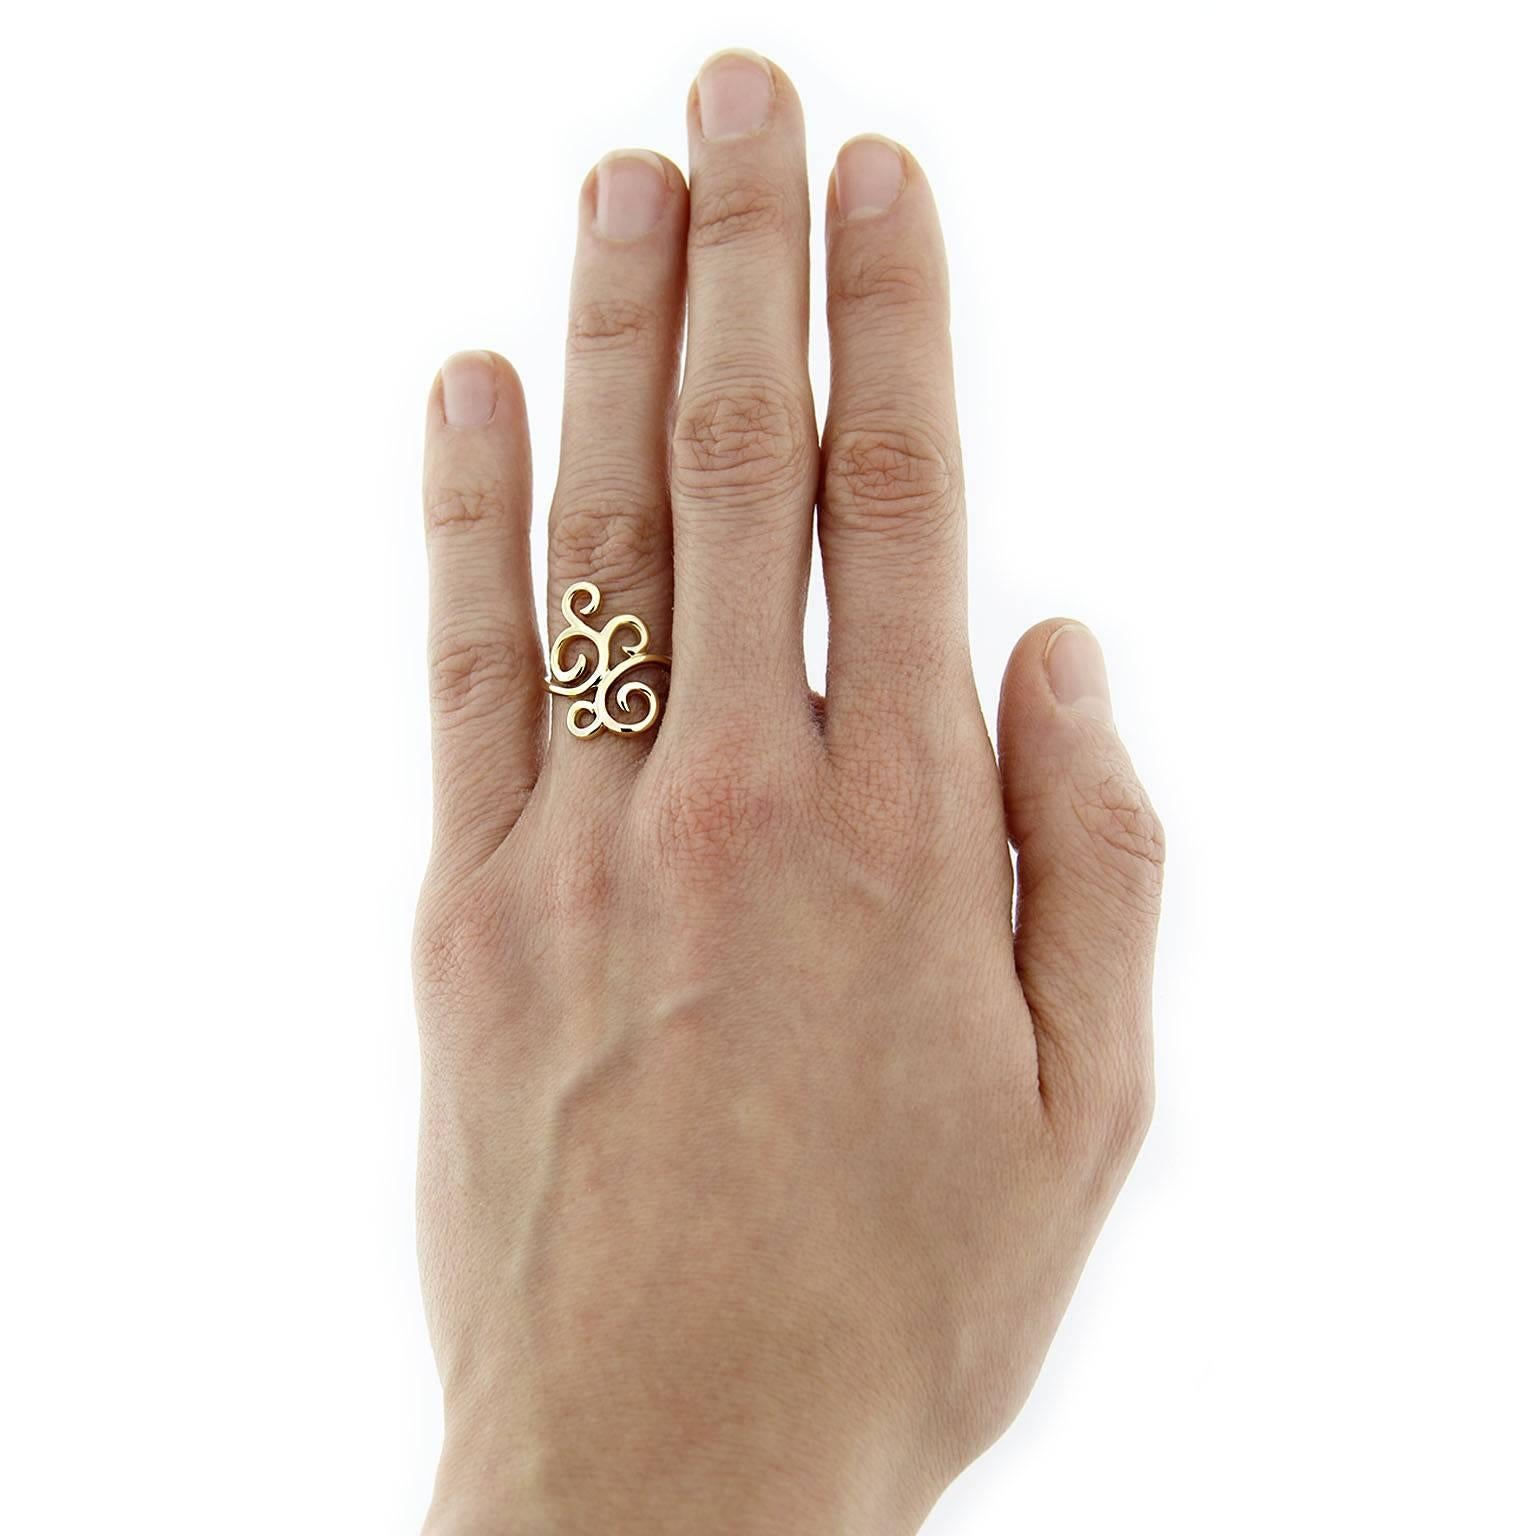 Ghirigori 18 karat yellow gold swirl ring designed by Jona and hand crafted in Italy. Ring size 6 US.
All Jona jewelry is new and has never been previously owned or worn. Each item will arrive at your door beautifully gift wrapped in Jona boxes, put